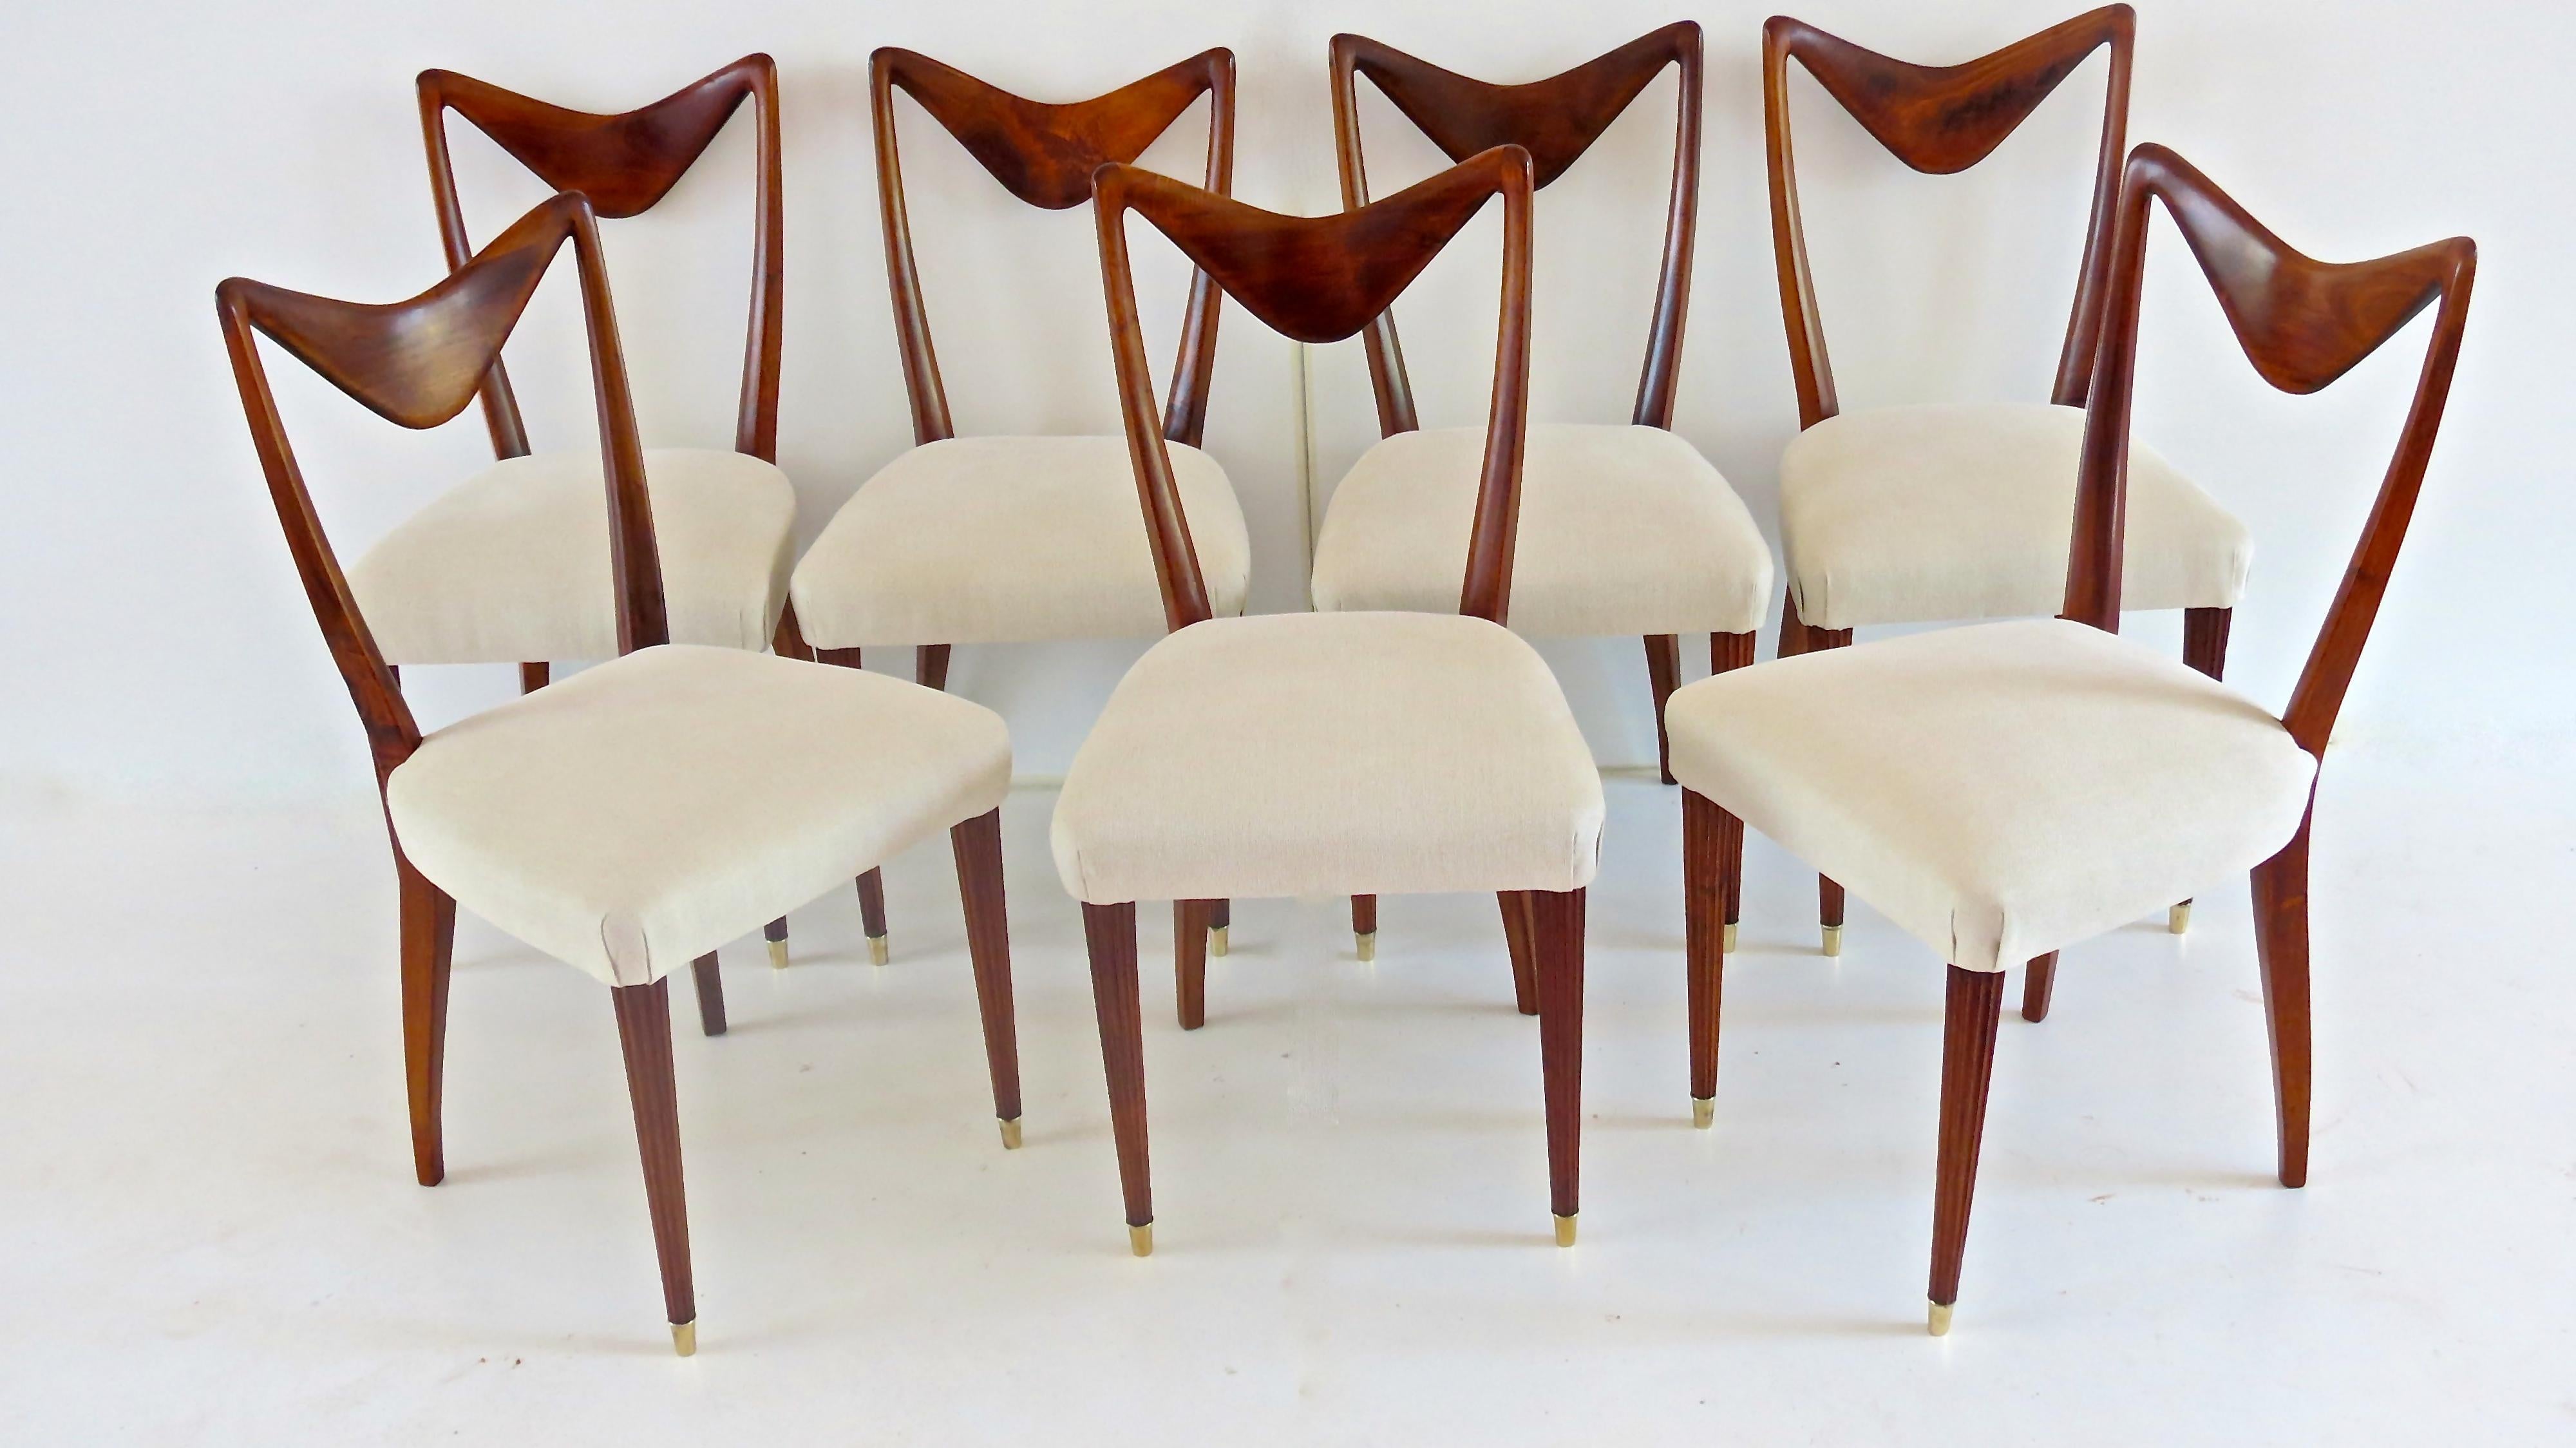 set of seven dining chairs Carlo Enrico Rava, for a private residence, 1940
walnut, brass, white cotton upholstery
very good original patina
the front legs are finely curved as a Doric column and a brass foot
the back legs as a saber